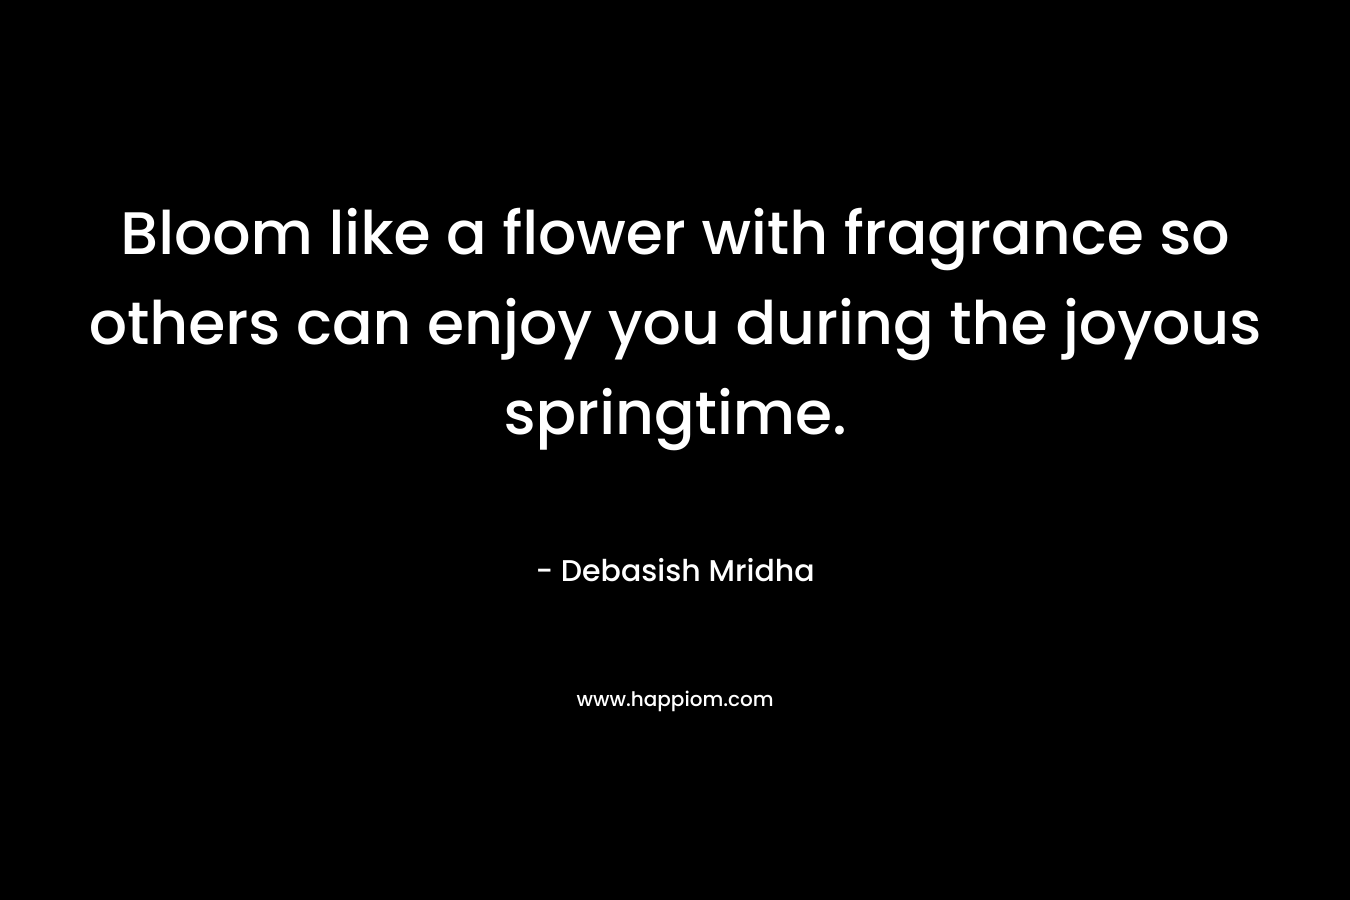 Bloom like a flower with fragrance so others can enjoy you during the joyous springtime. – Debasish Mridha